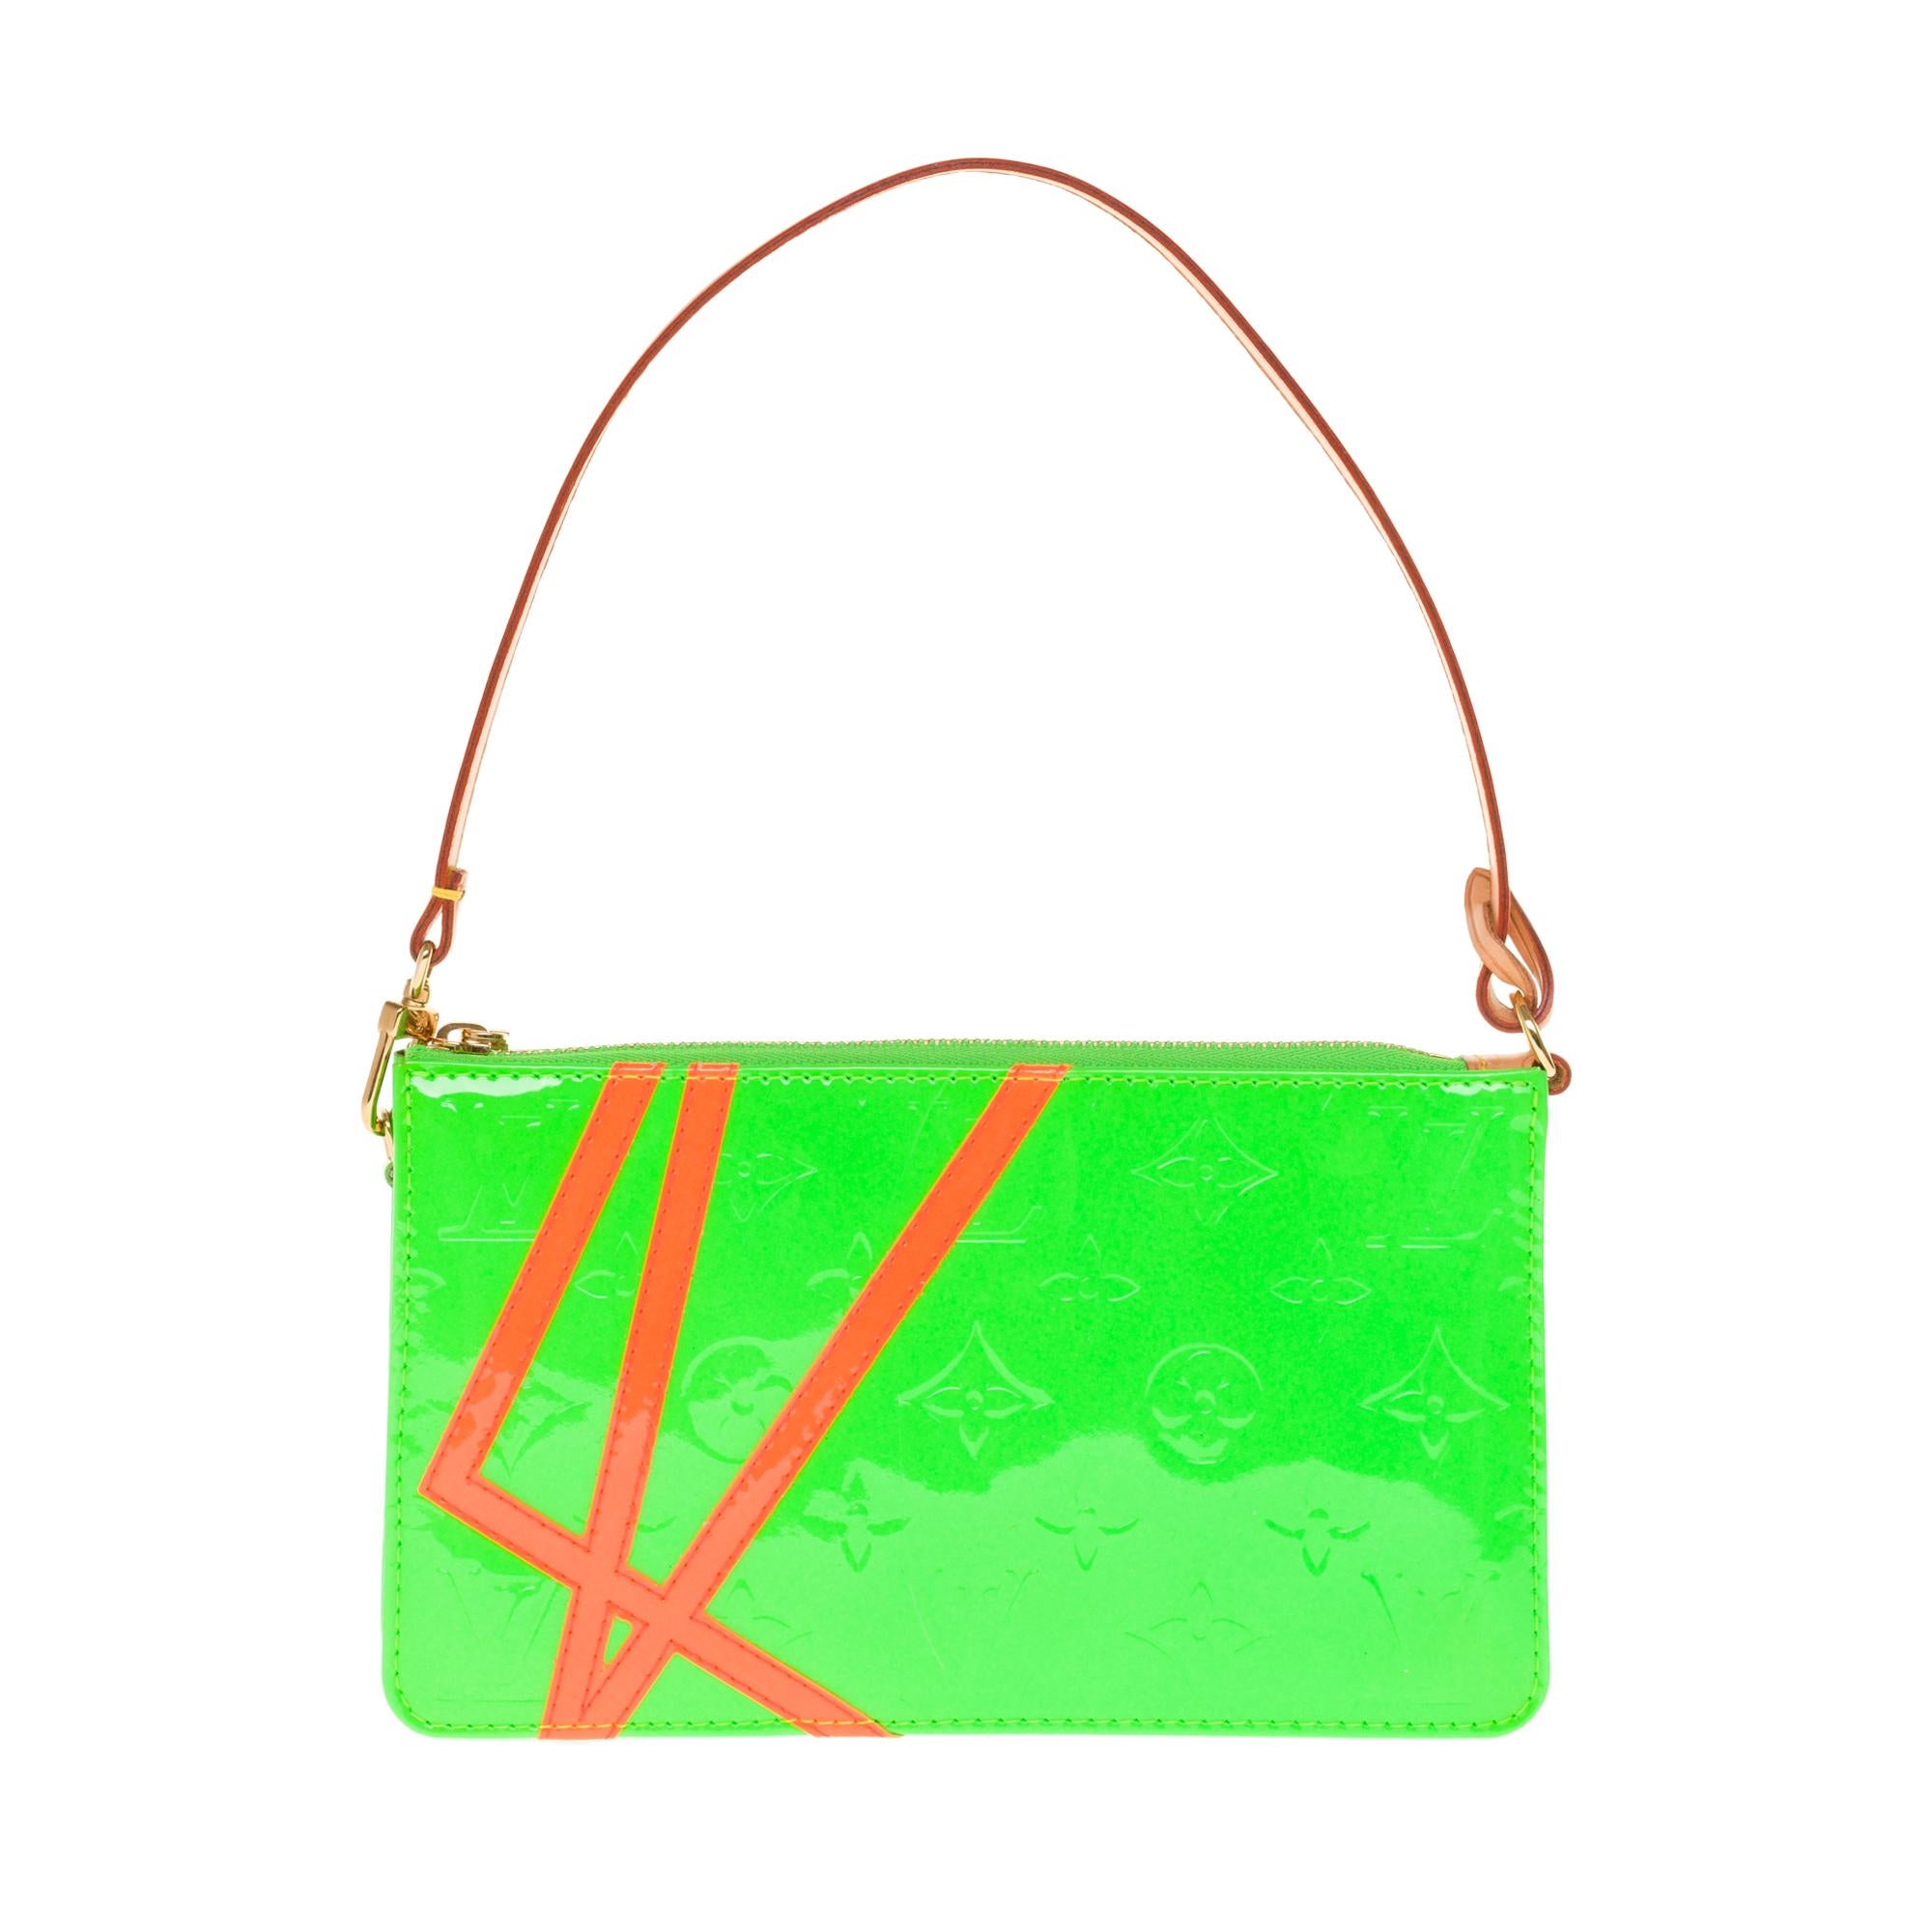 SOLD OUT- Unavailable

The Pochette Lexington designed by Robert Wilson is made of apple green patent leather with orange neon stripes, zip top closure and removable cowhide leather handle.
Signature: 